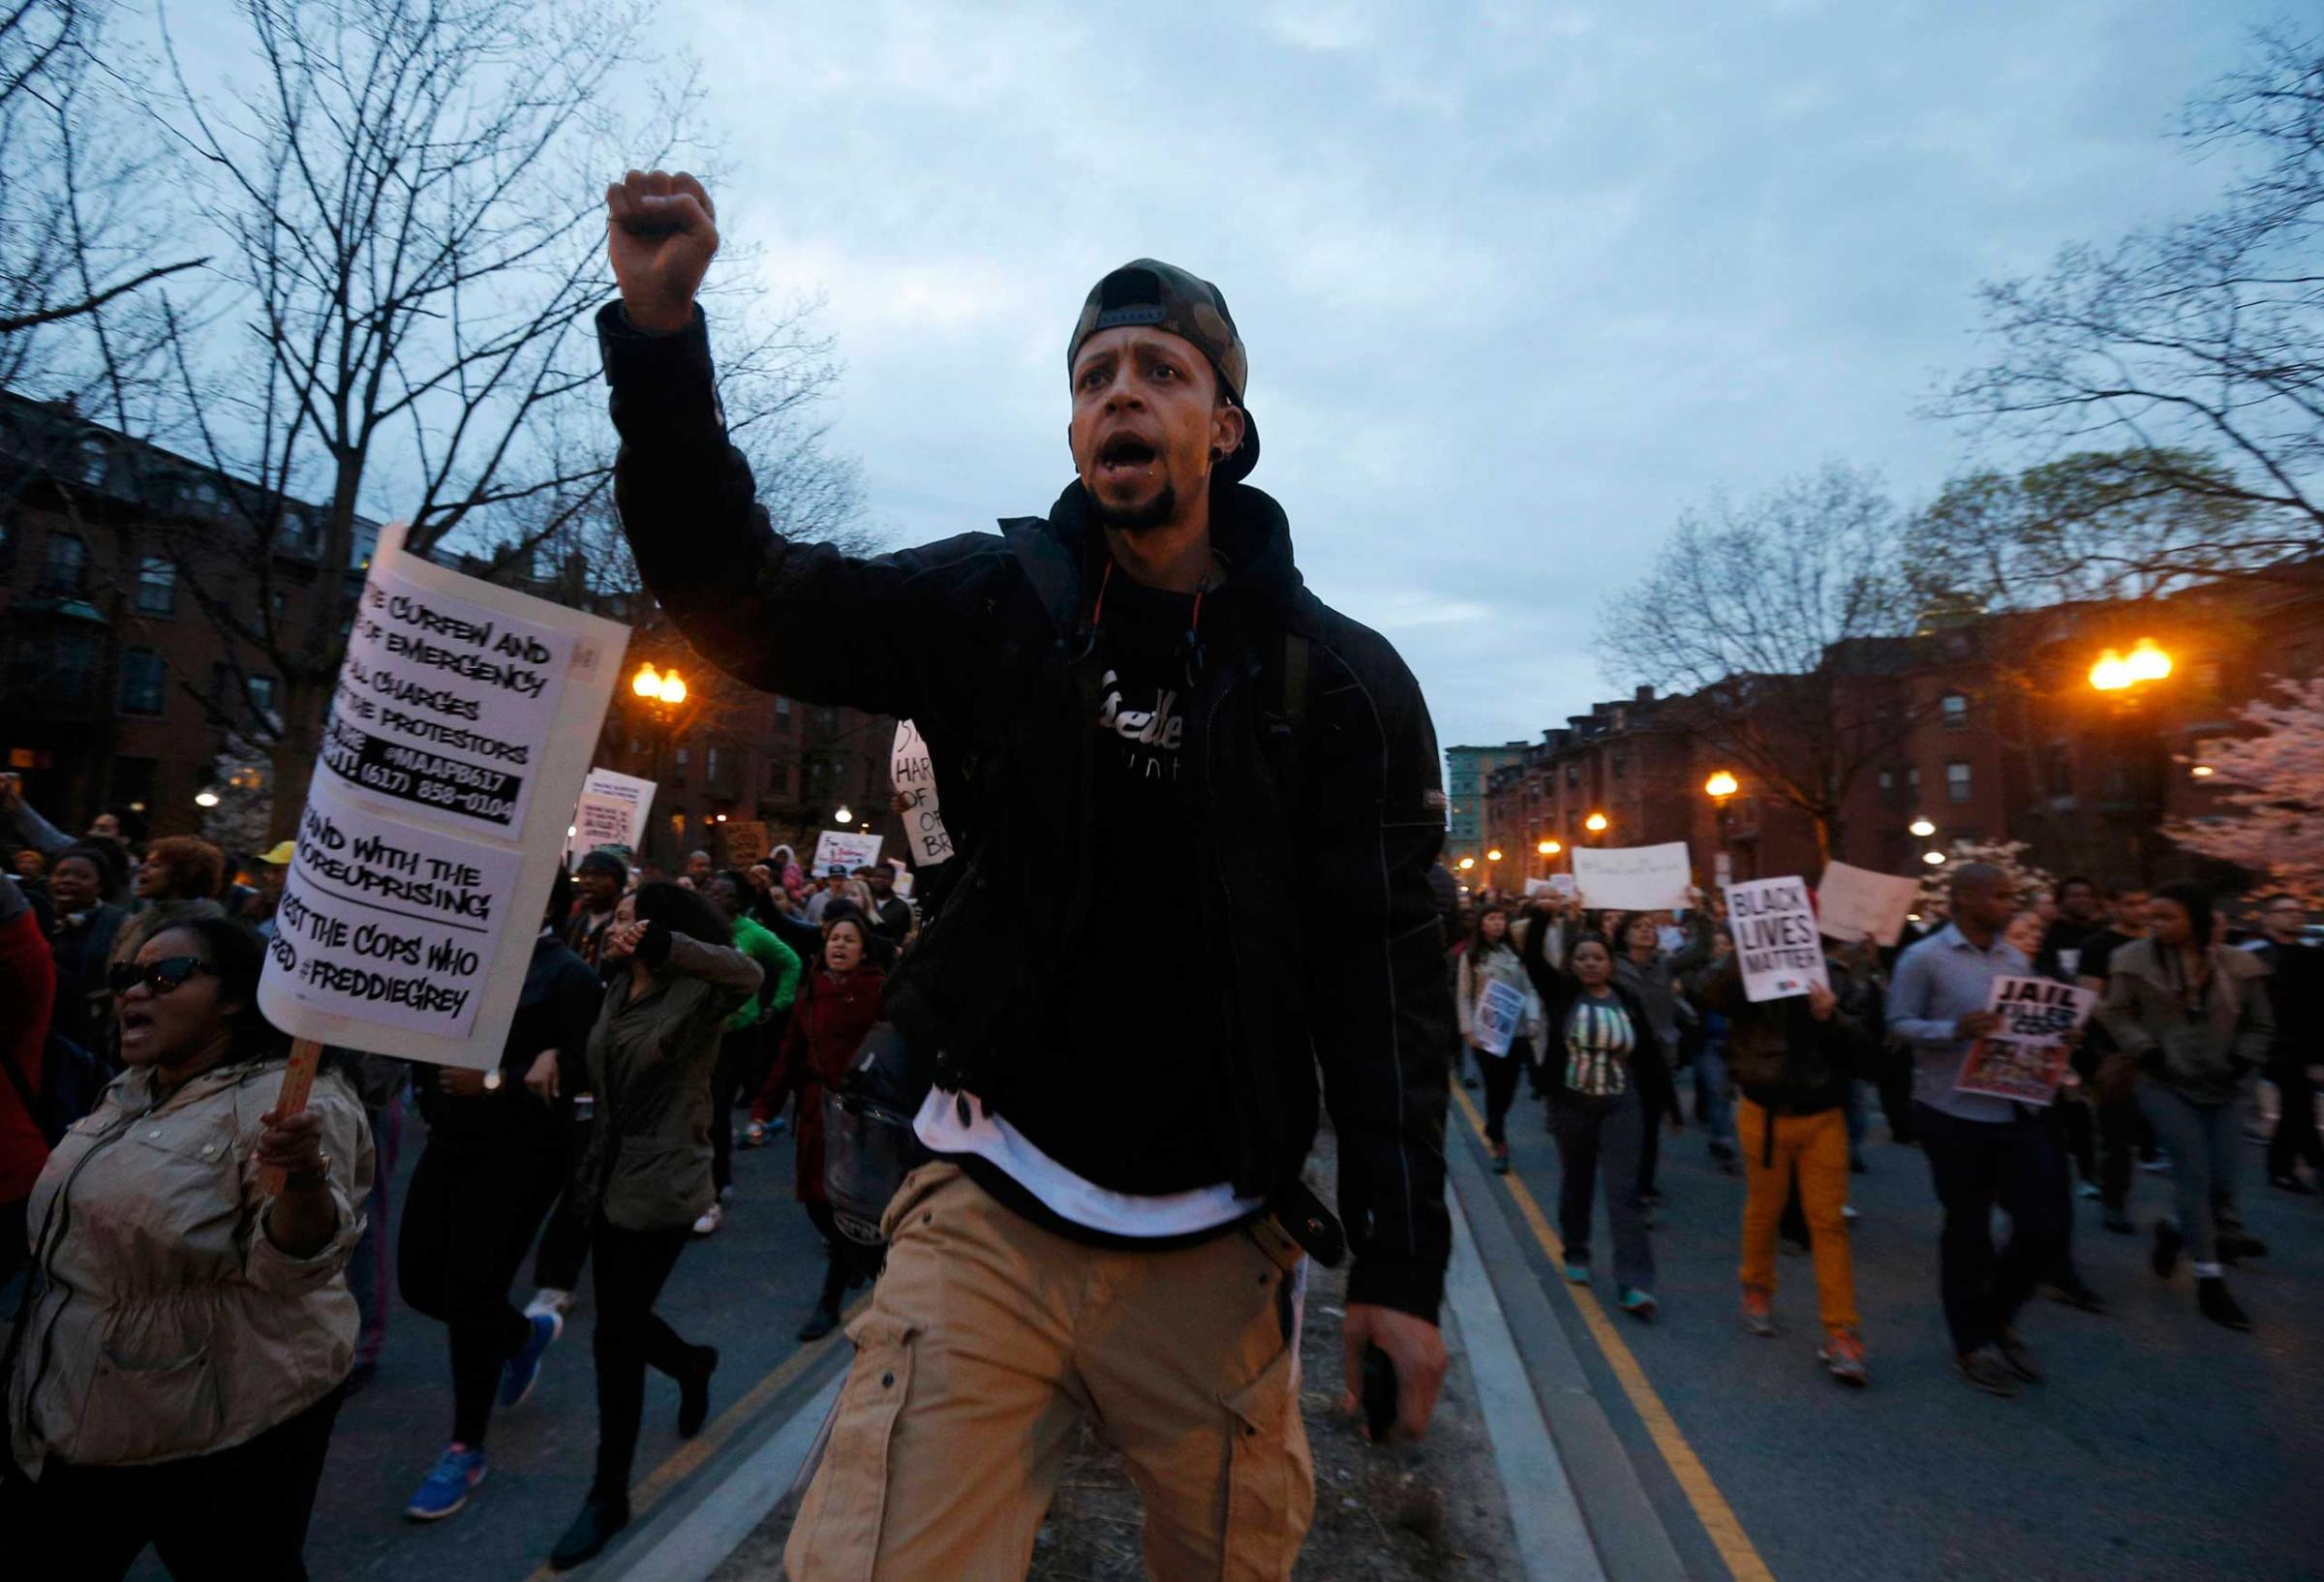 People march in protest against police violence in Boston on April 29, 2015.